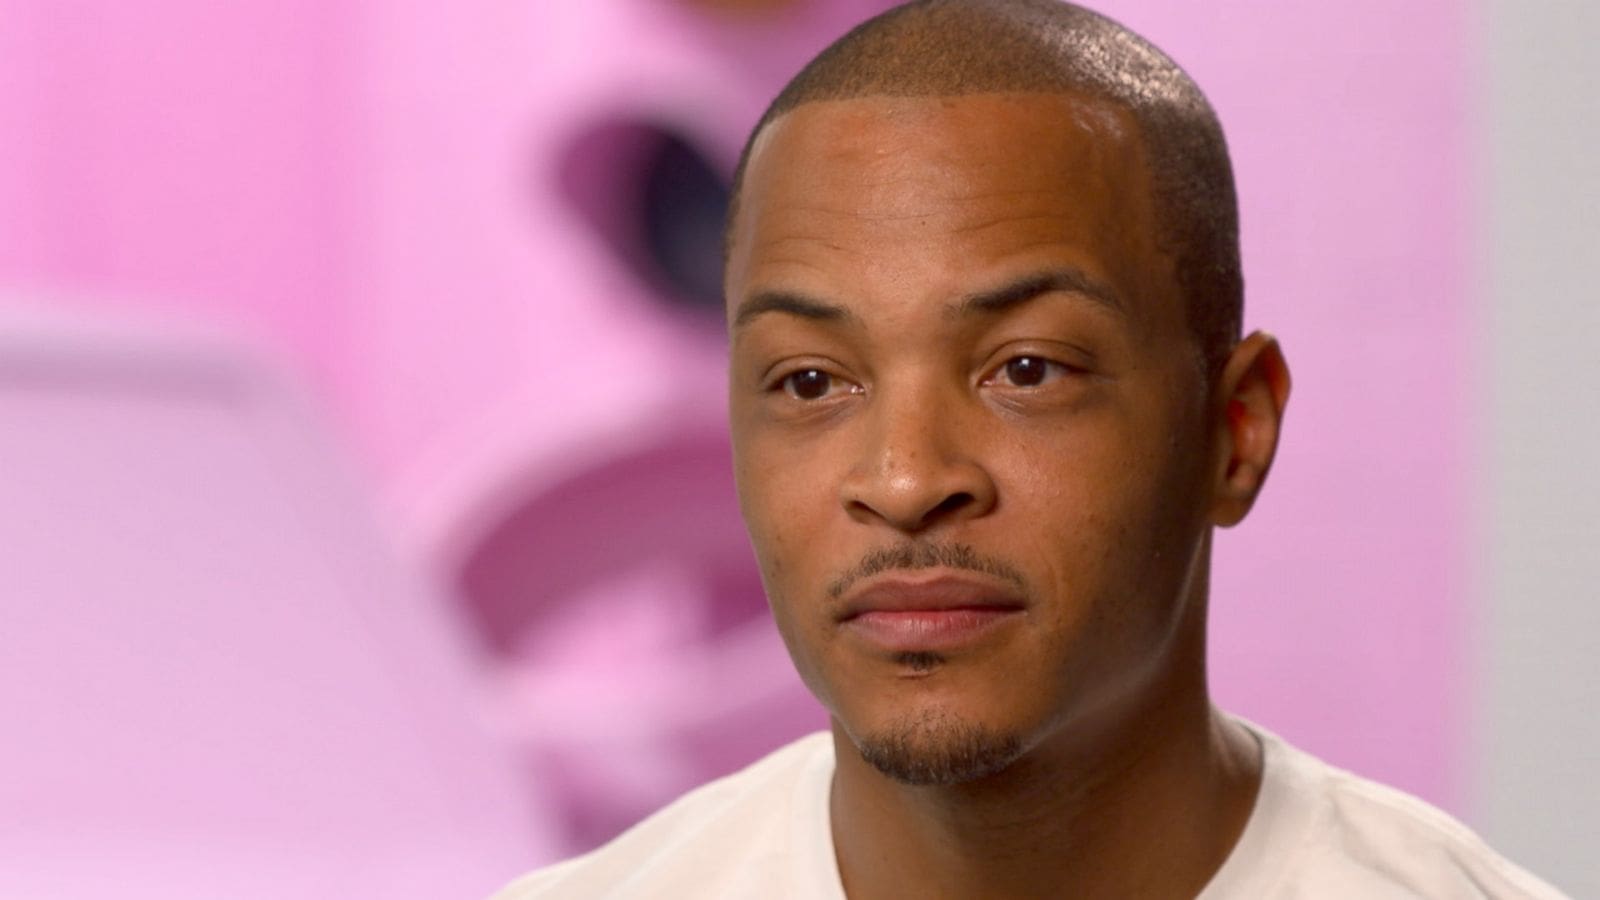 T.I. Drops Important Advice For Fans - See His Video